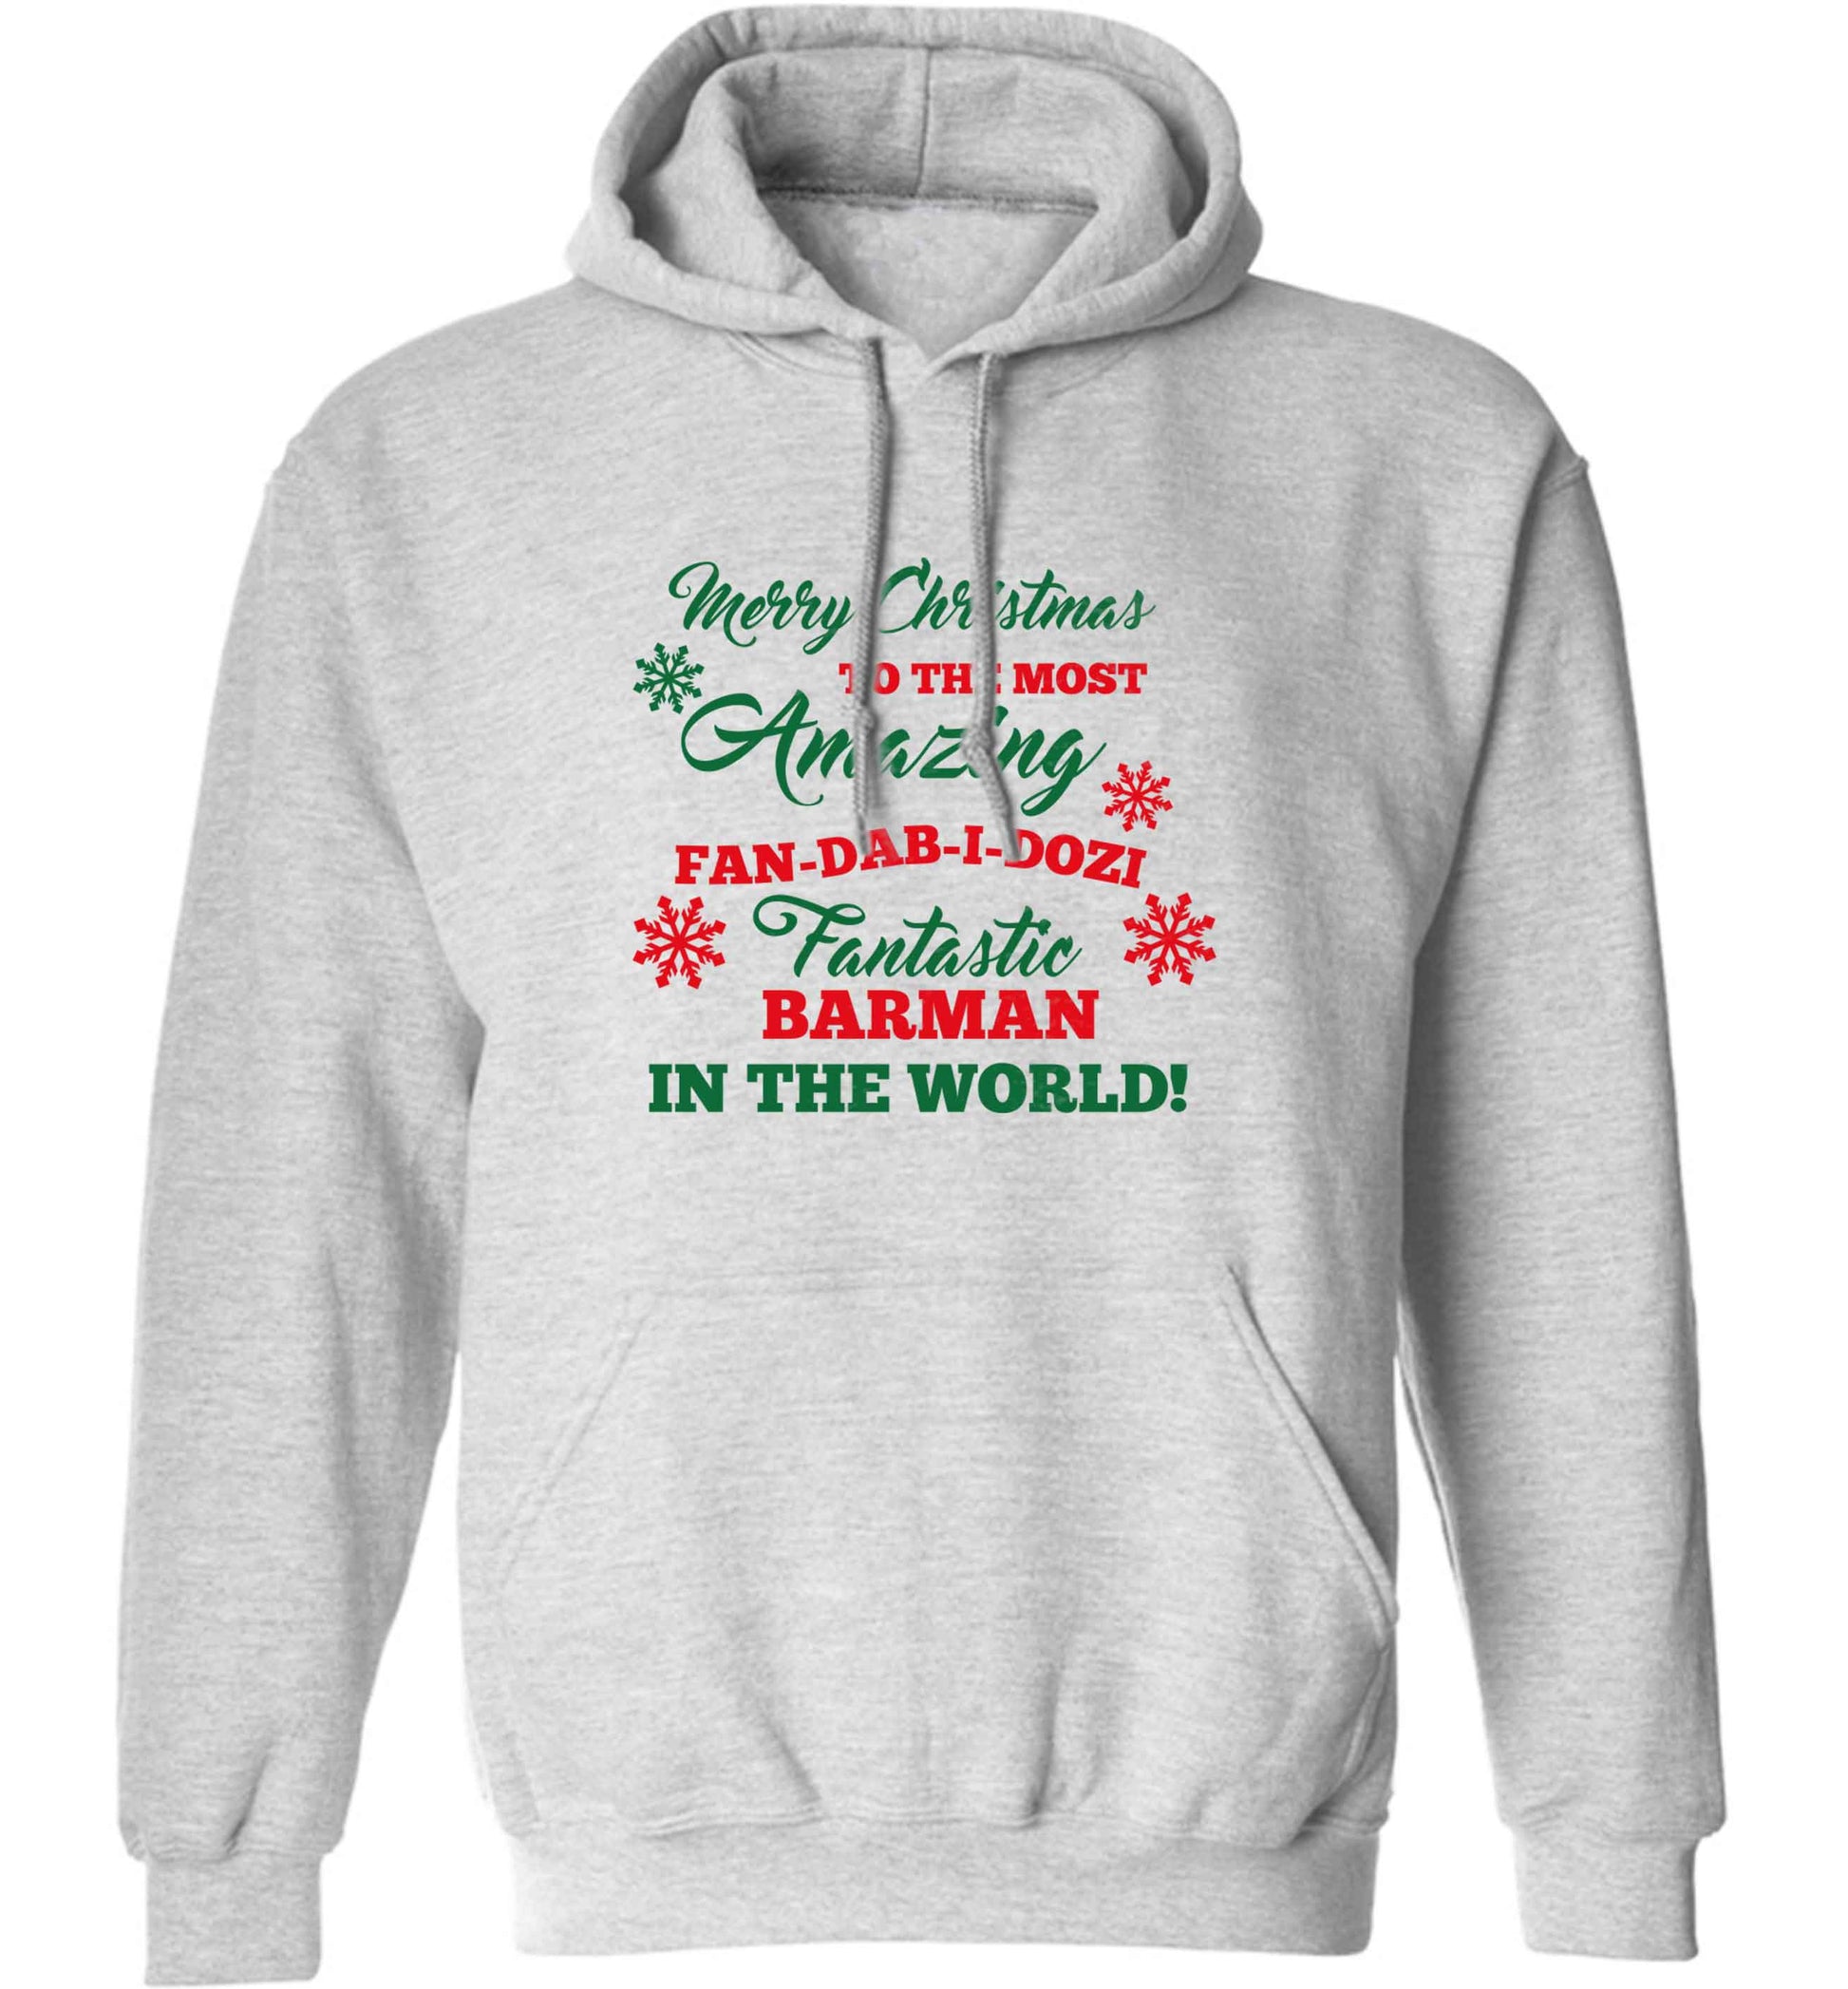 Merry Christmas to the most amazing barman in the world! adults unisex grey hoodie 2XL